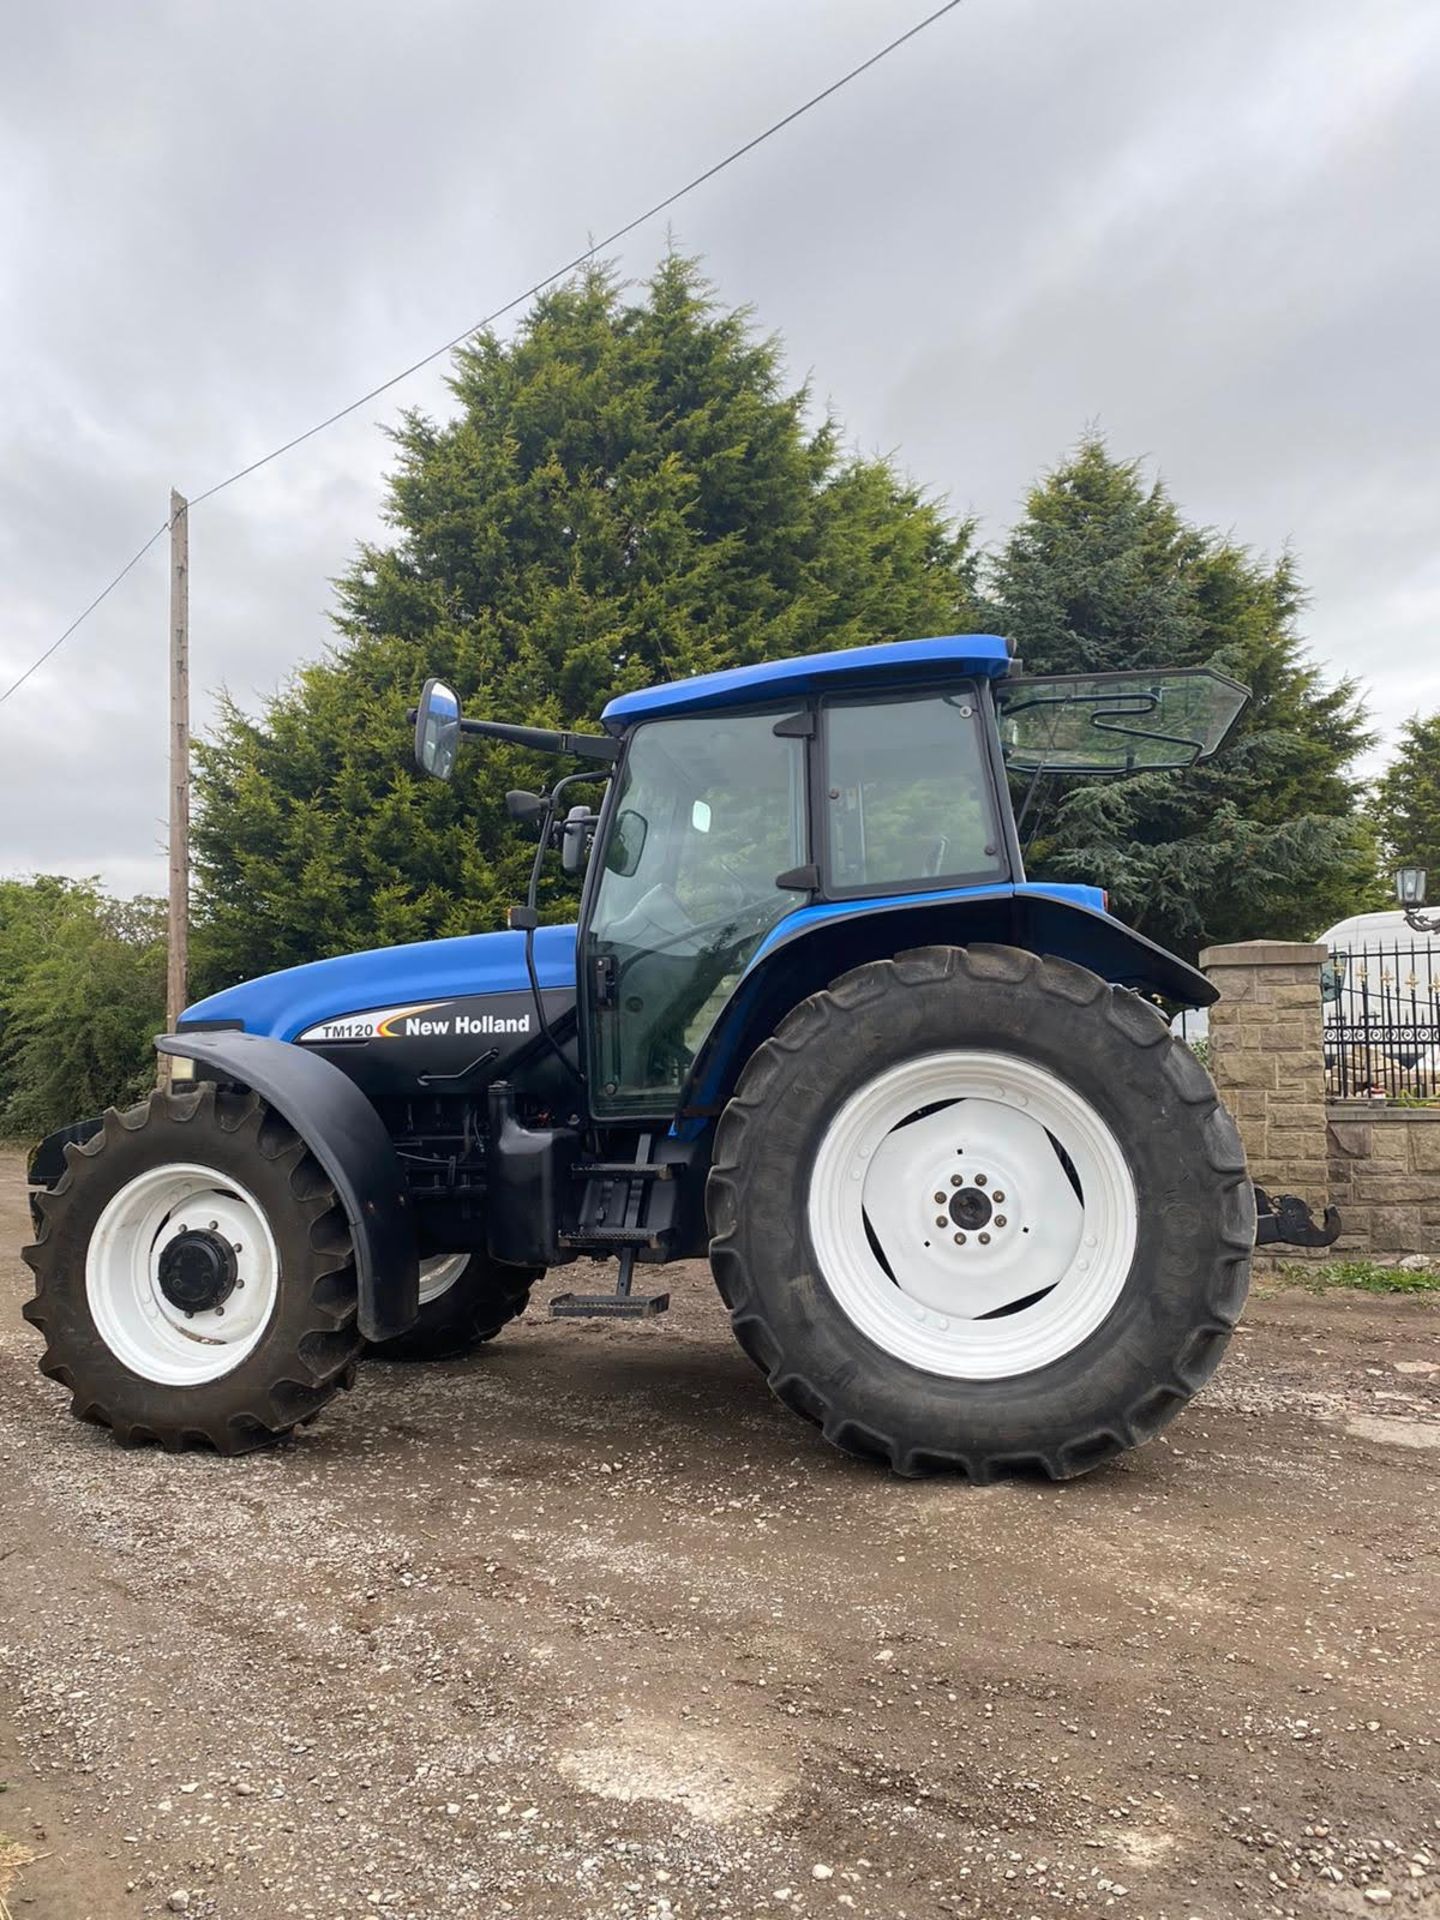 NEW HOLLAND TM120 TRACTOR, 4 WHEEL DRIVE, LOW HOURS ONLY 6128 GENUINE, MANUAL GEARBOX *PLUS VAT* - Image 4 of 10